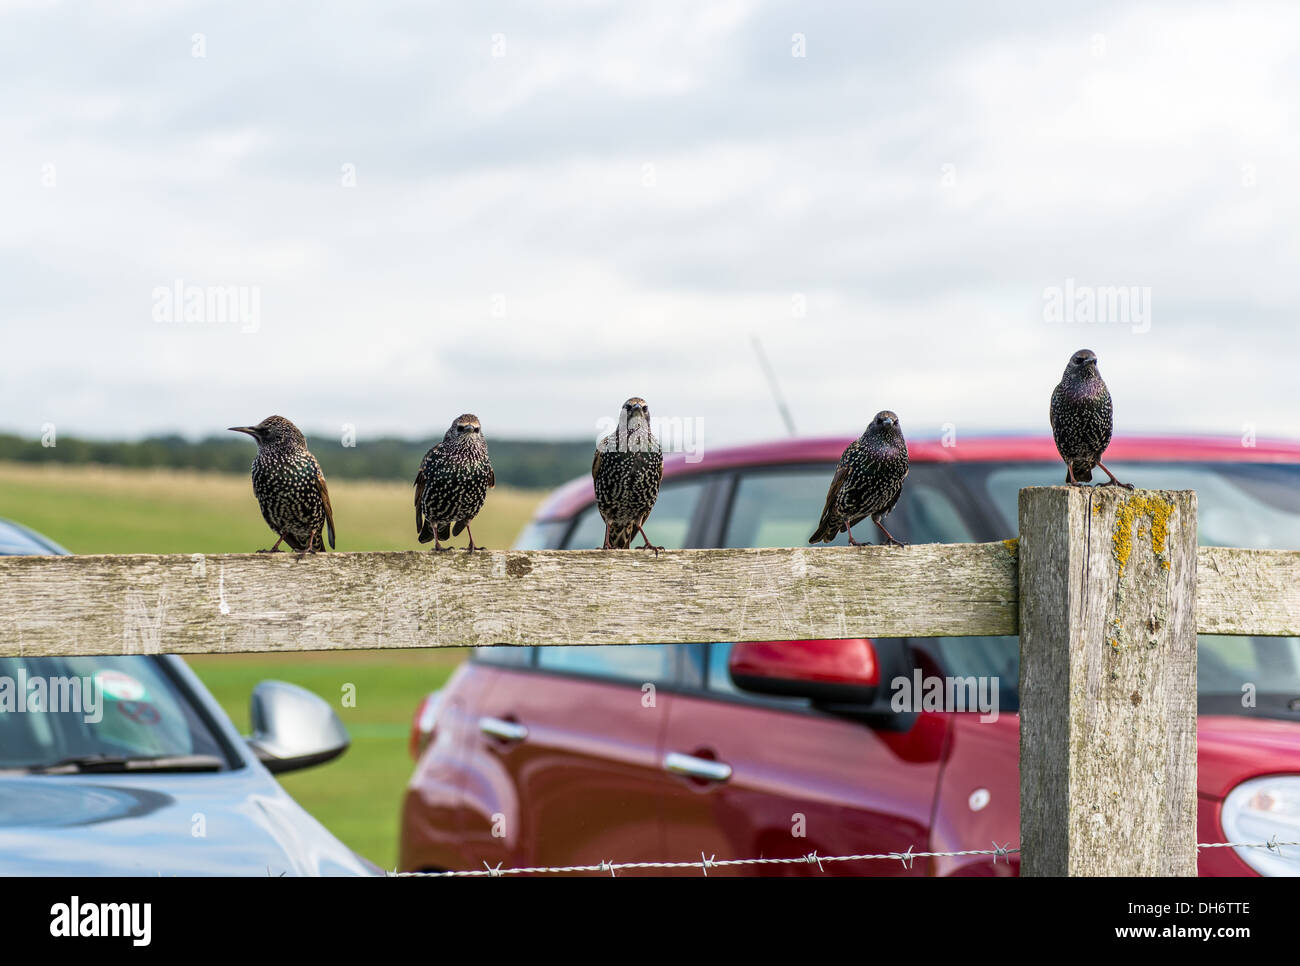 Amesbury, Wiltshire, England. 5 starlings are perched on a fence. Stock Photo